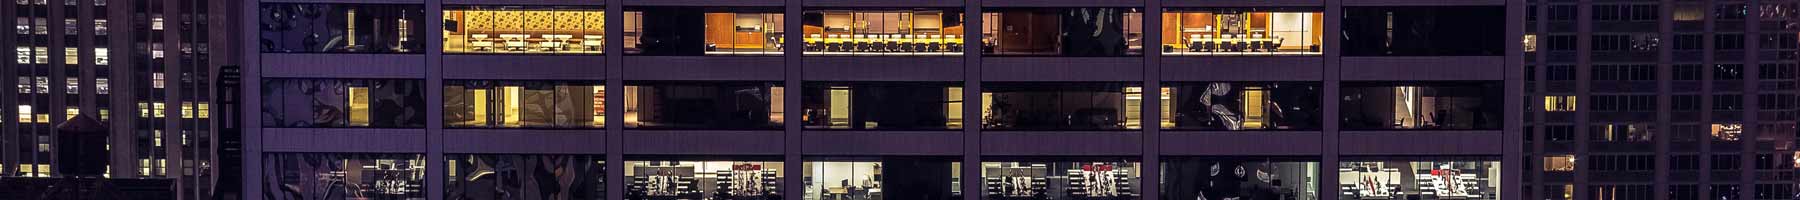 Photograph of windows in an office tower taken outside the building at night.